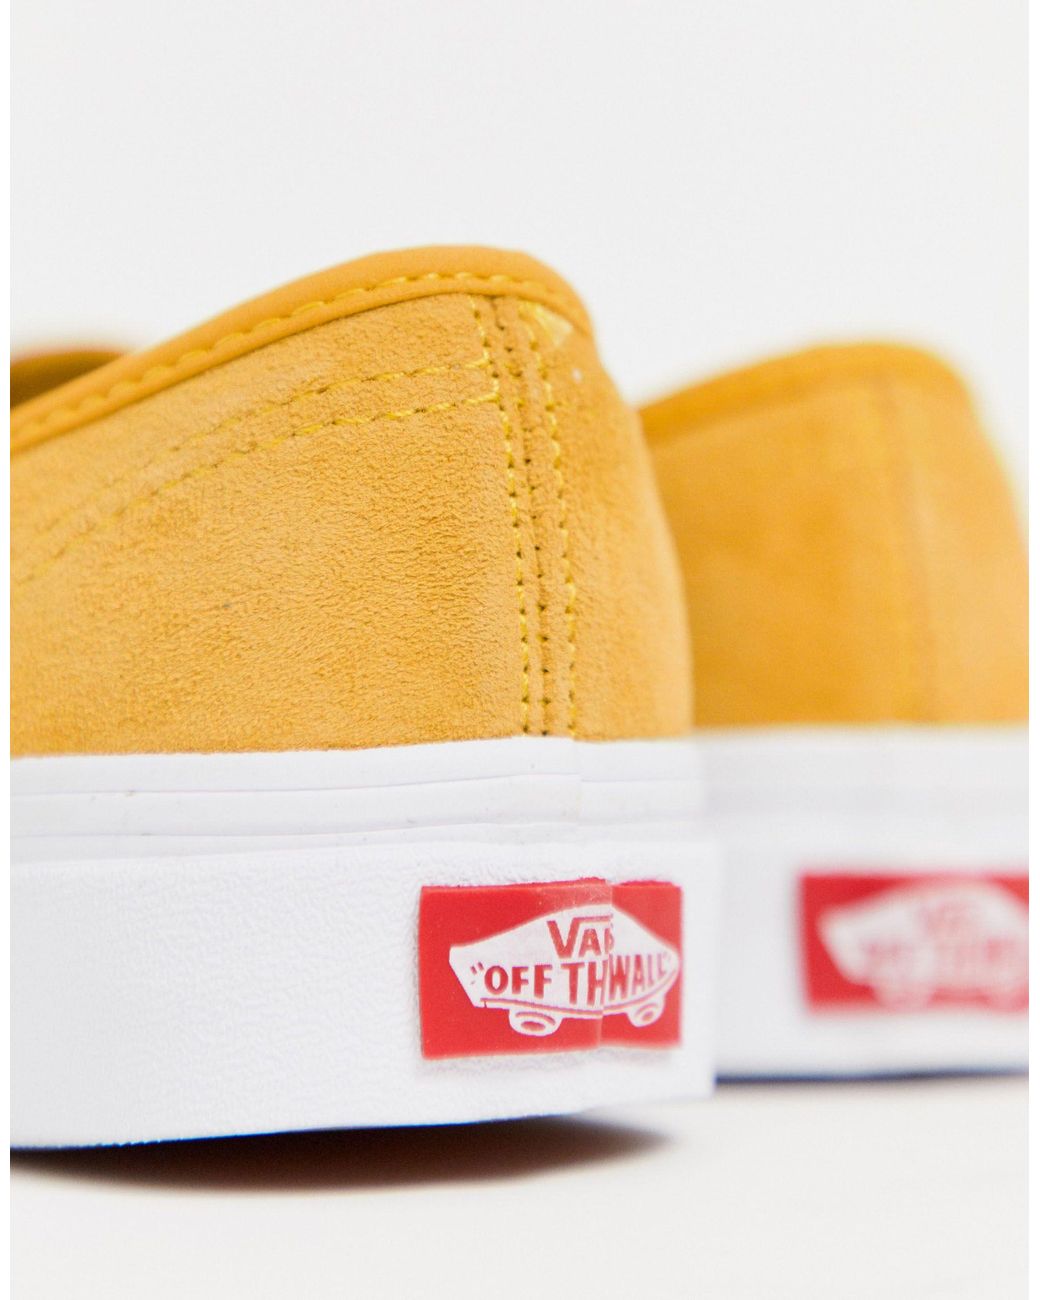 Vans Authentic Mustard Suede Trainers in Yellow | Lyst